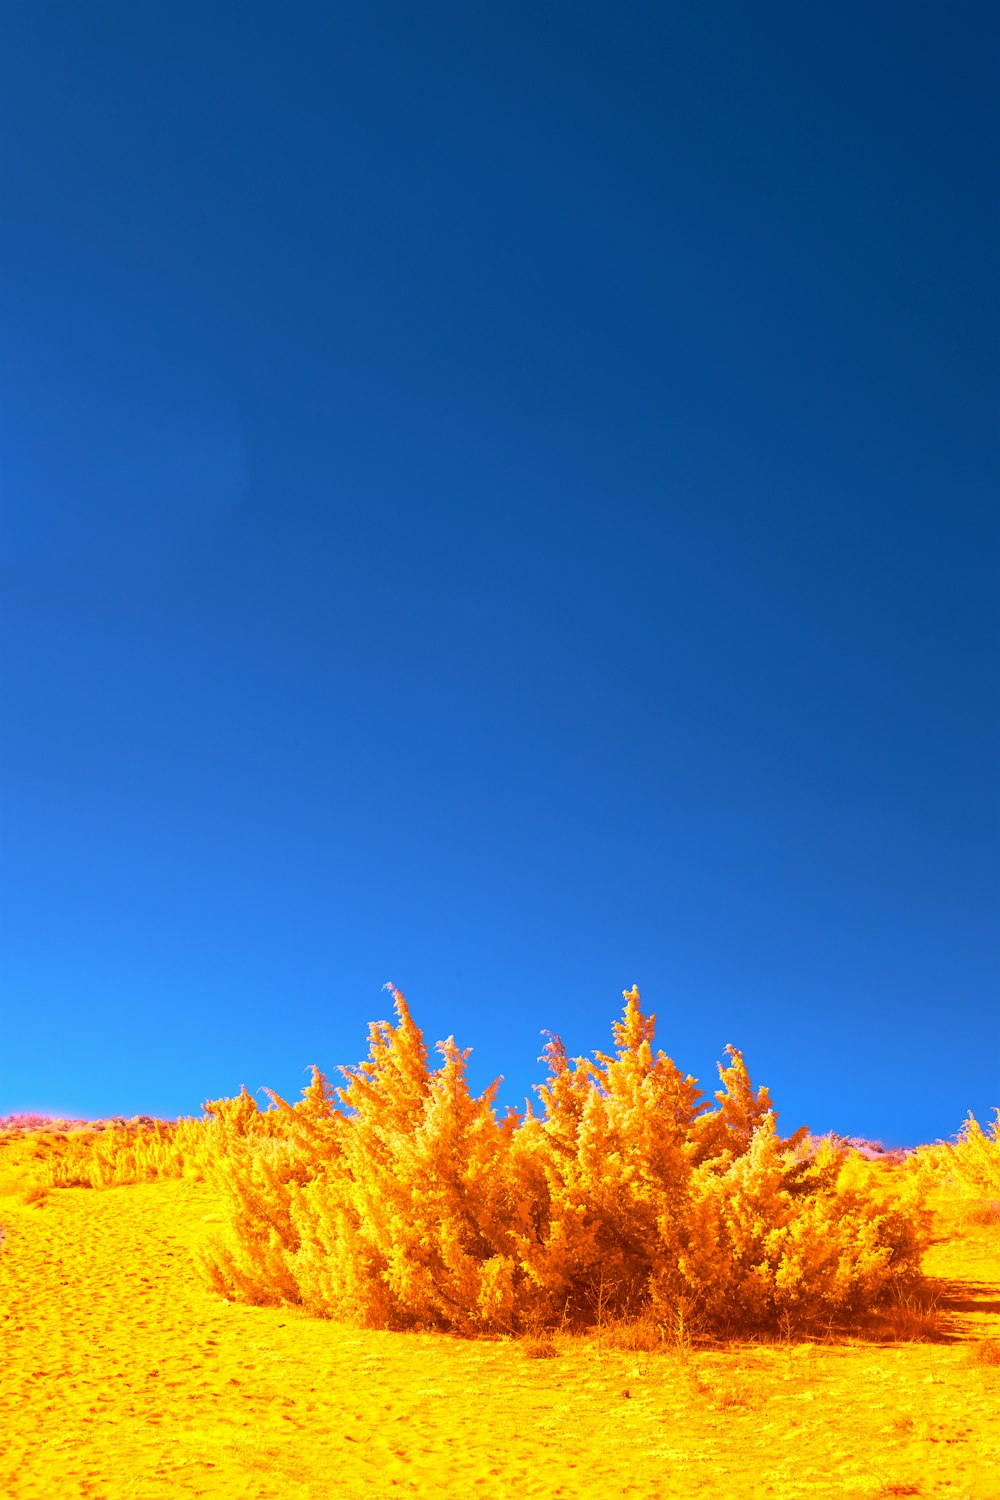 a yellow bush in the middle of a desert